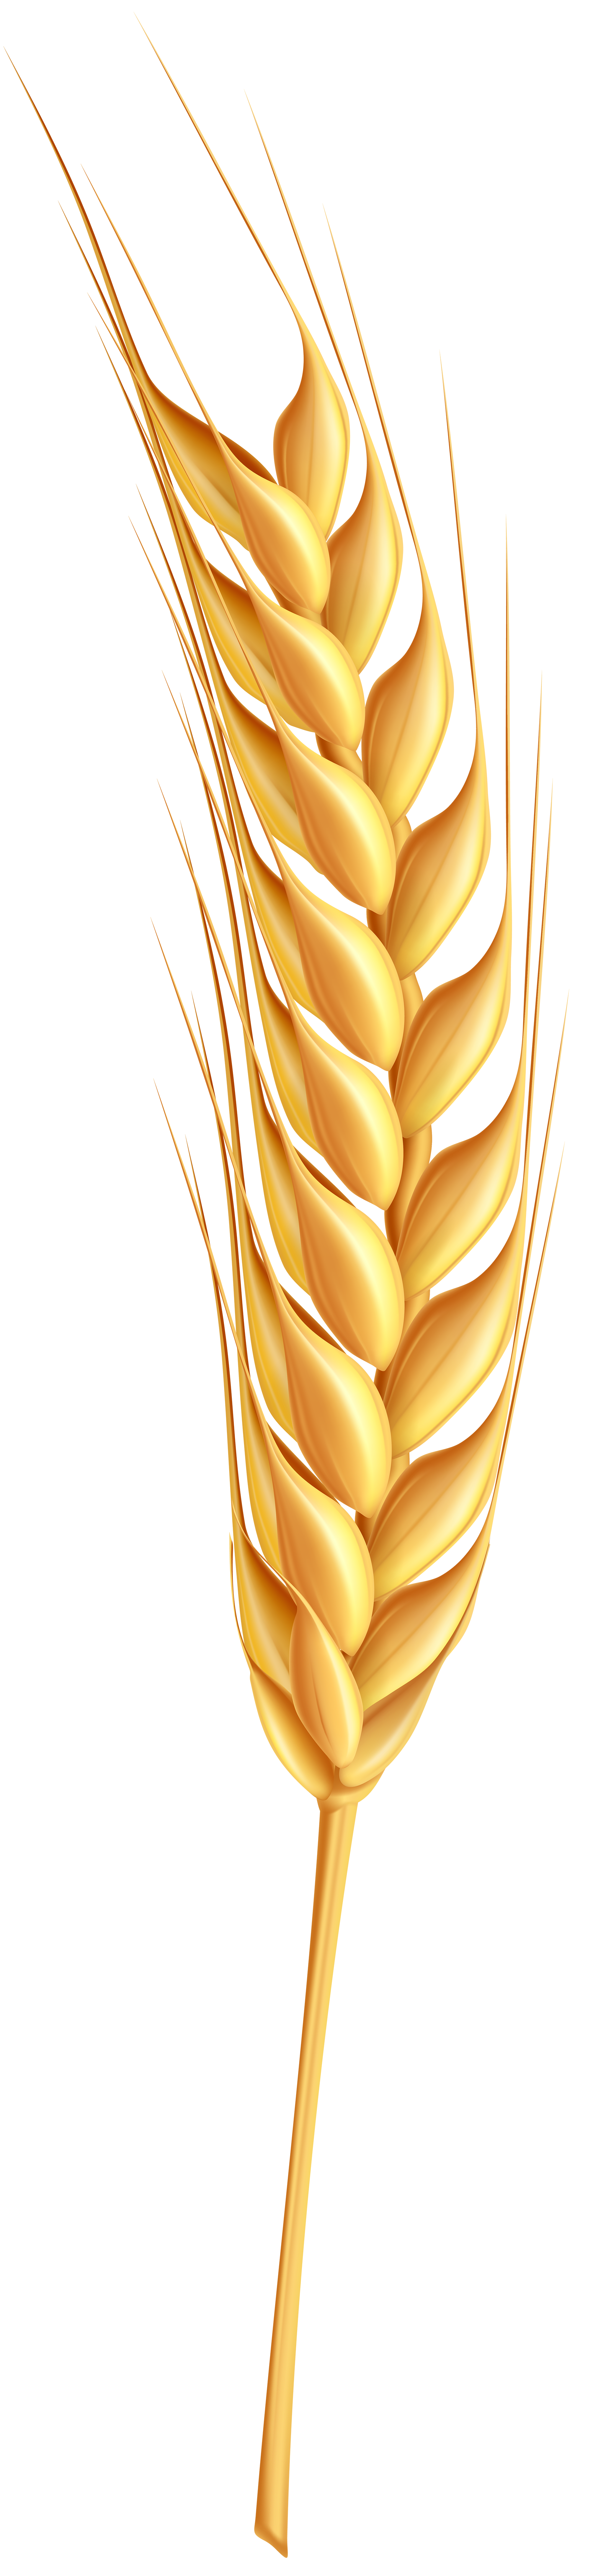 Download Wheat ear clipart 20 free Cliparts | Download images on ...